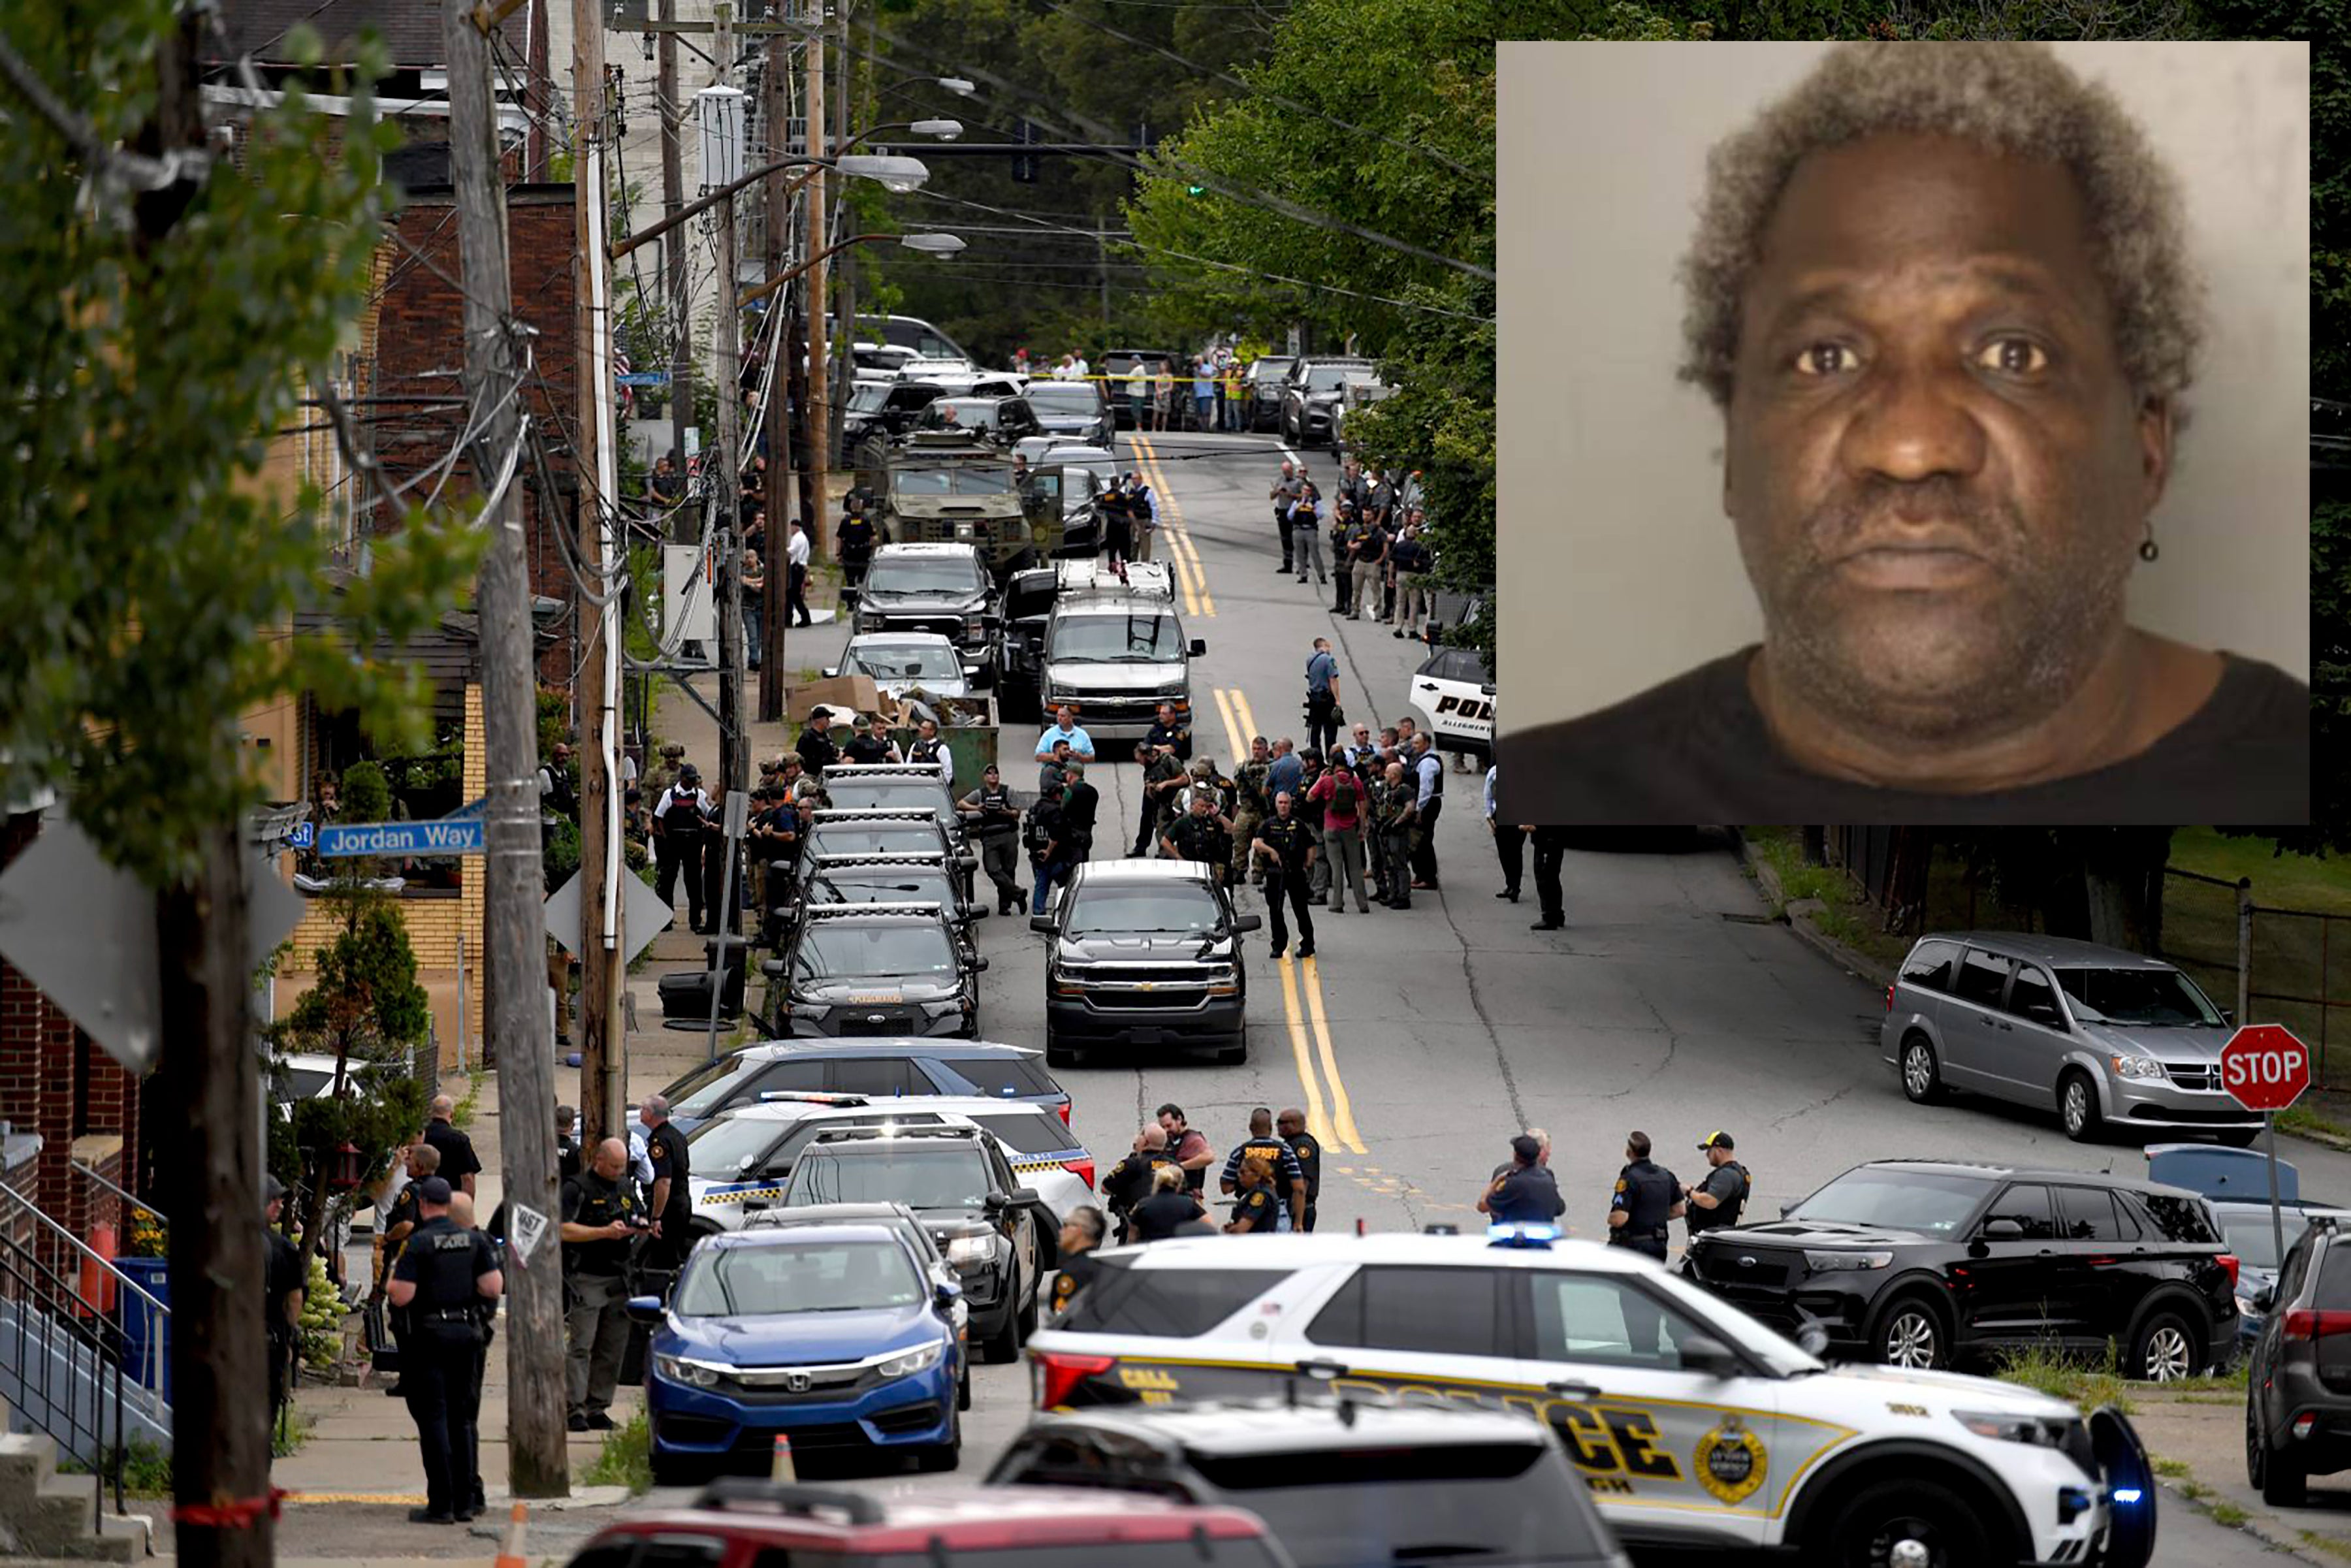 <p>William Hardison Sr has been identified as the suspect in the Pittsburgh shooting, a source confirmed to The Independent</p>